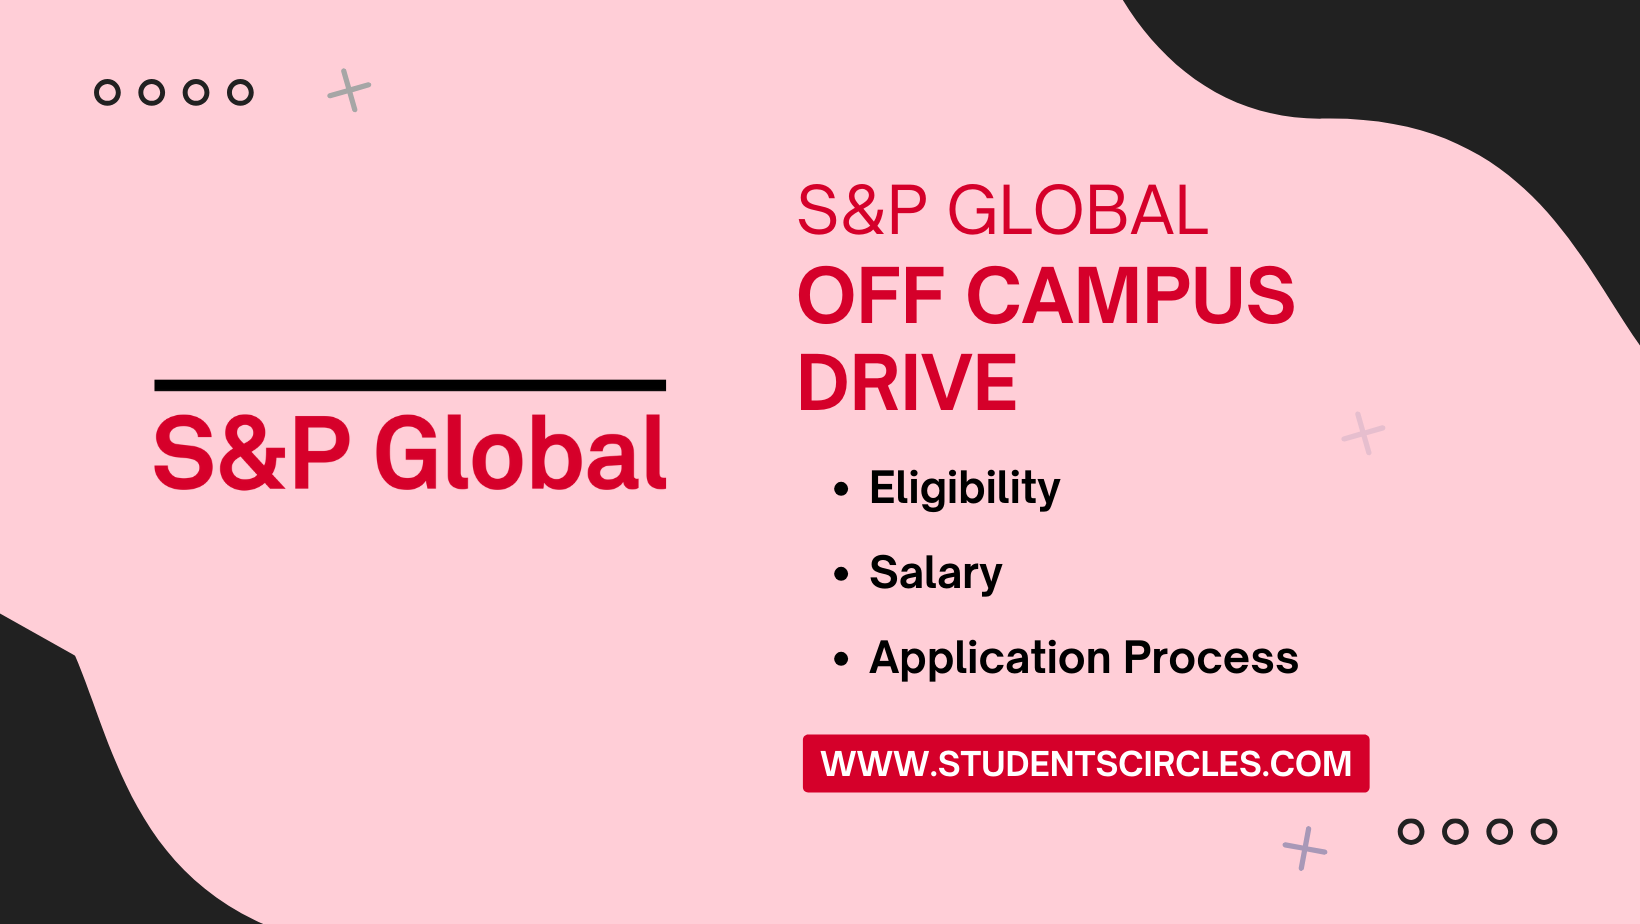 S&P Global Off Campus Drive